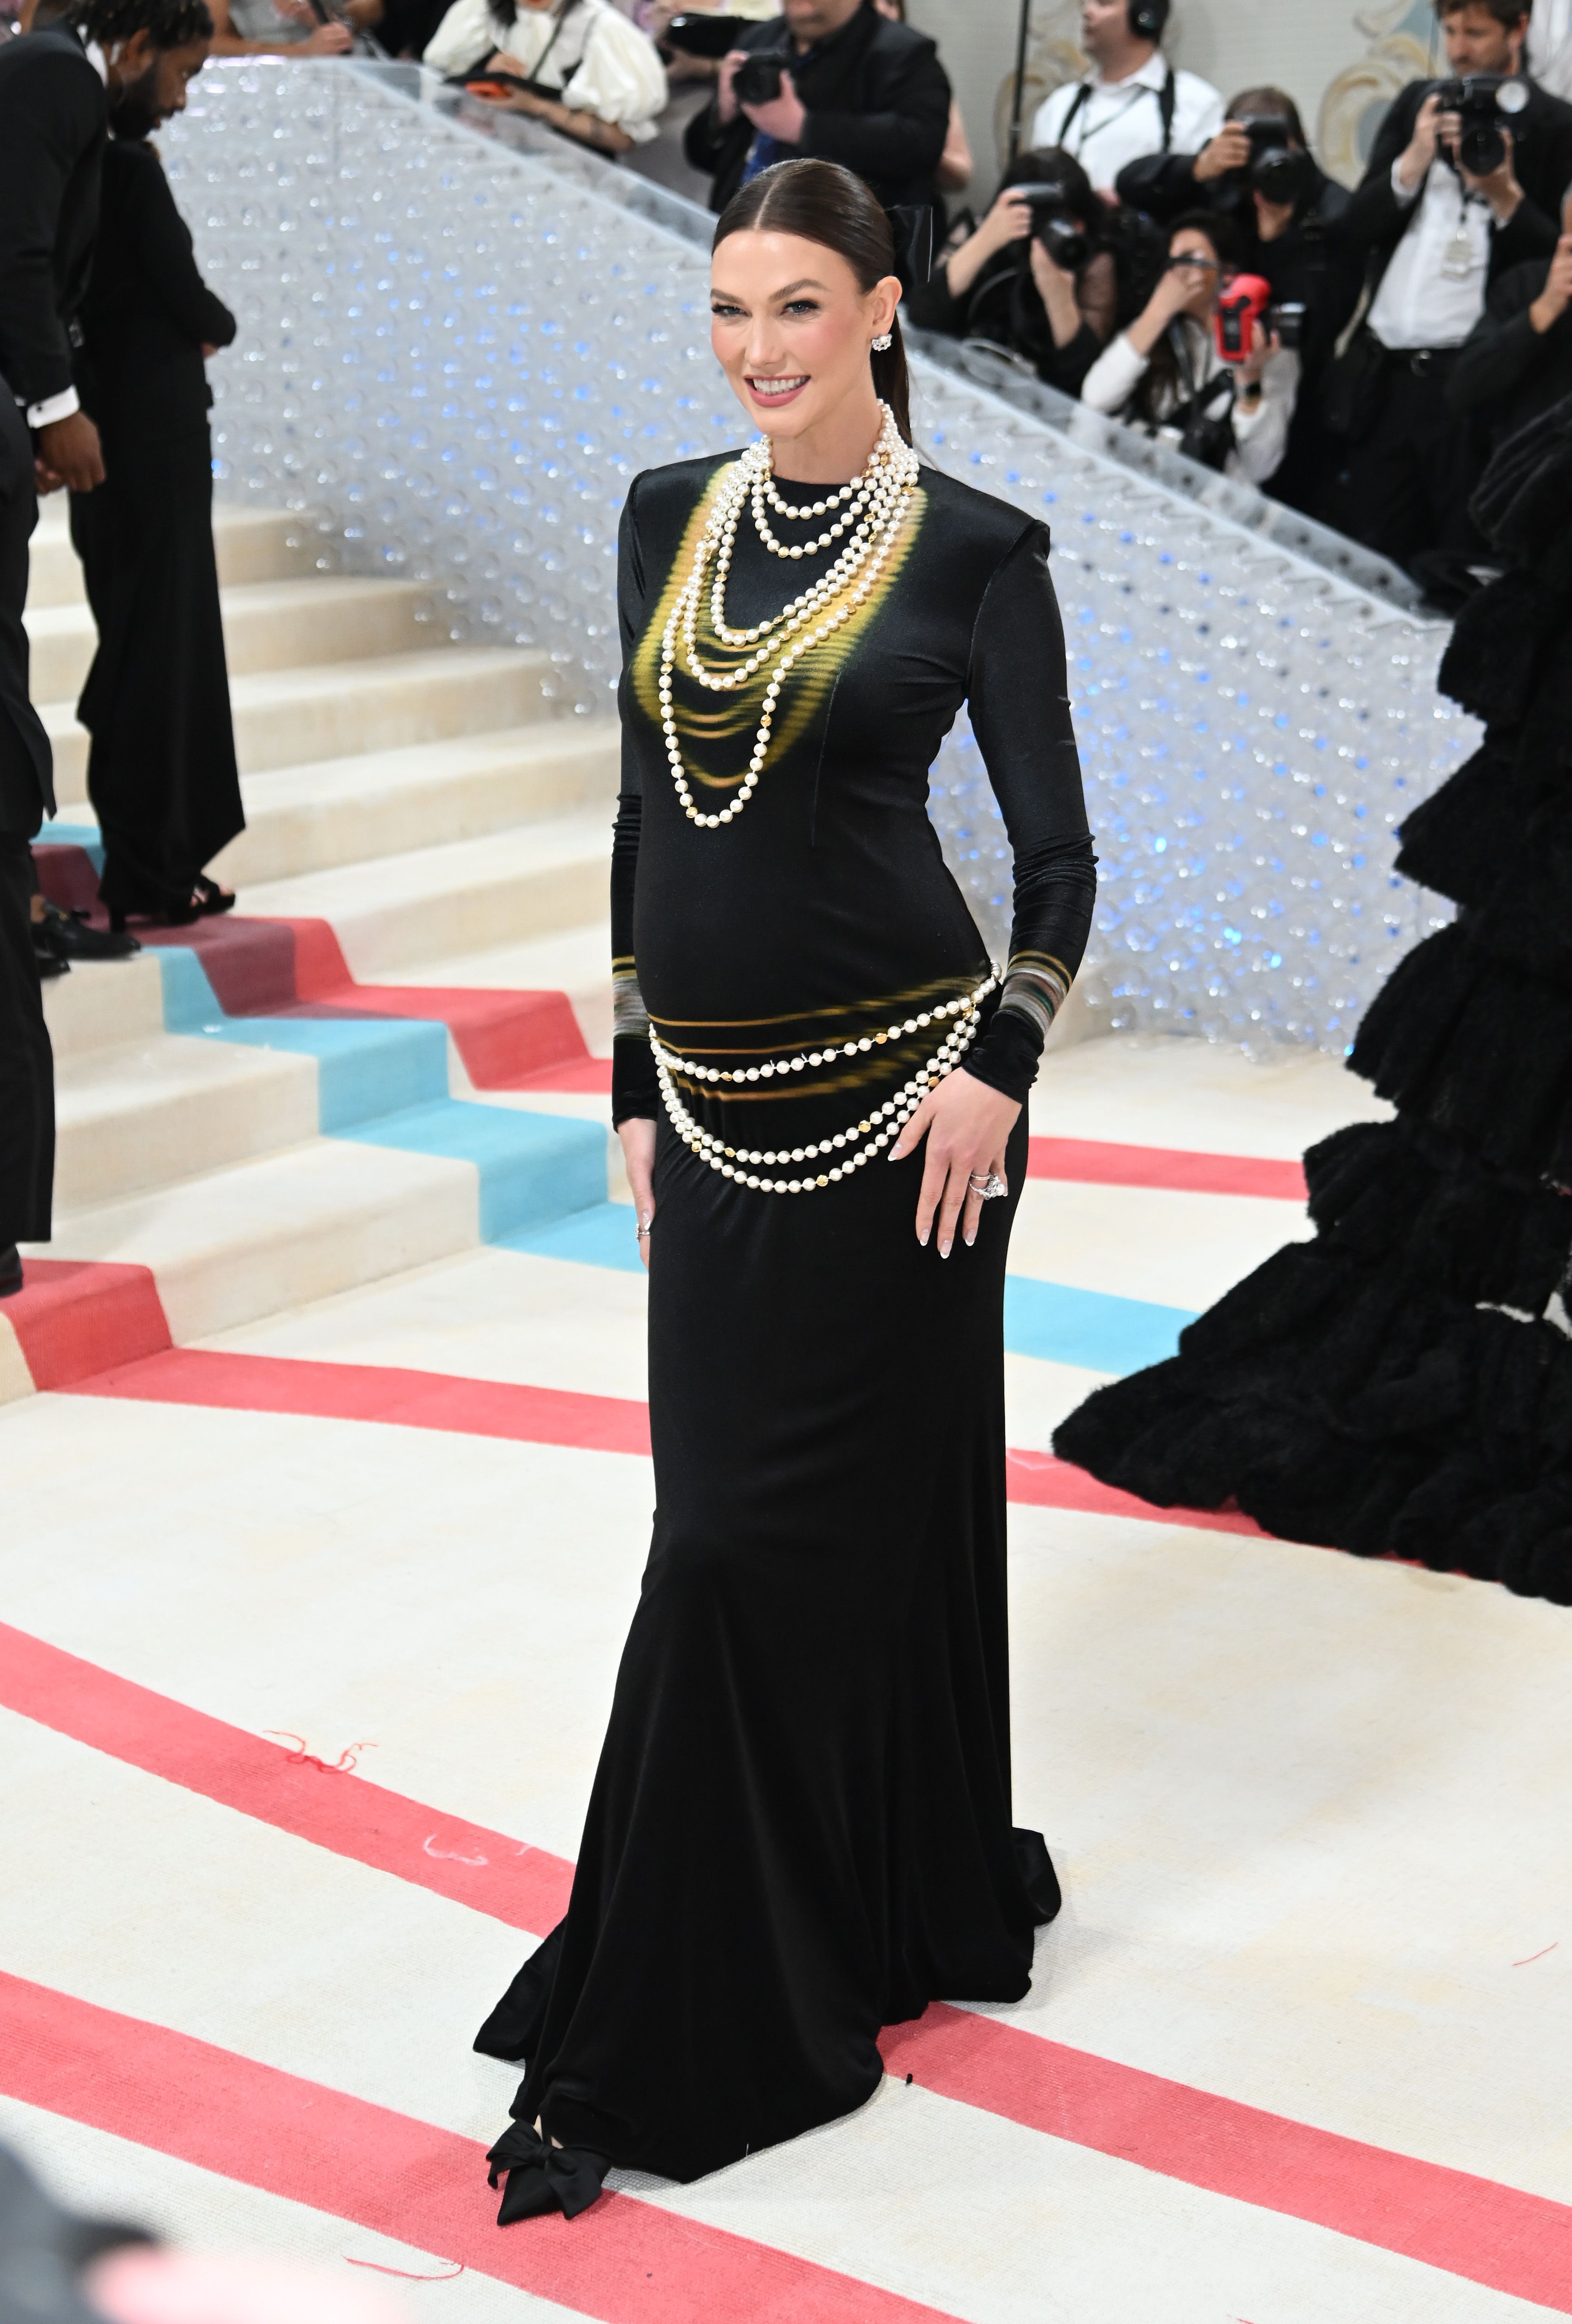 The best Met Gala jewellery looks this year are all about pearls